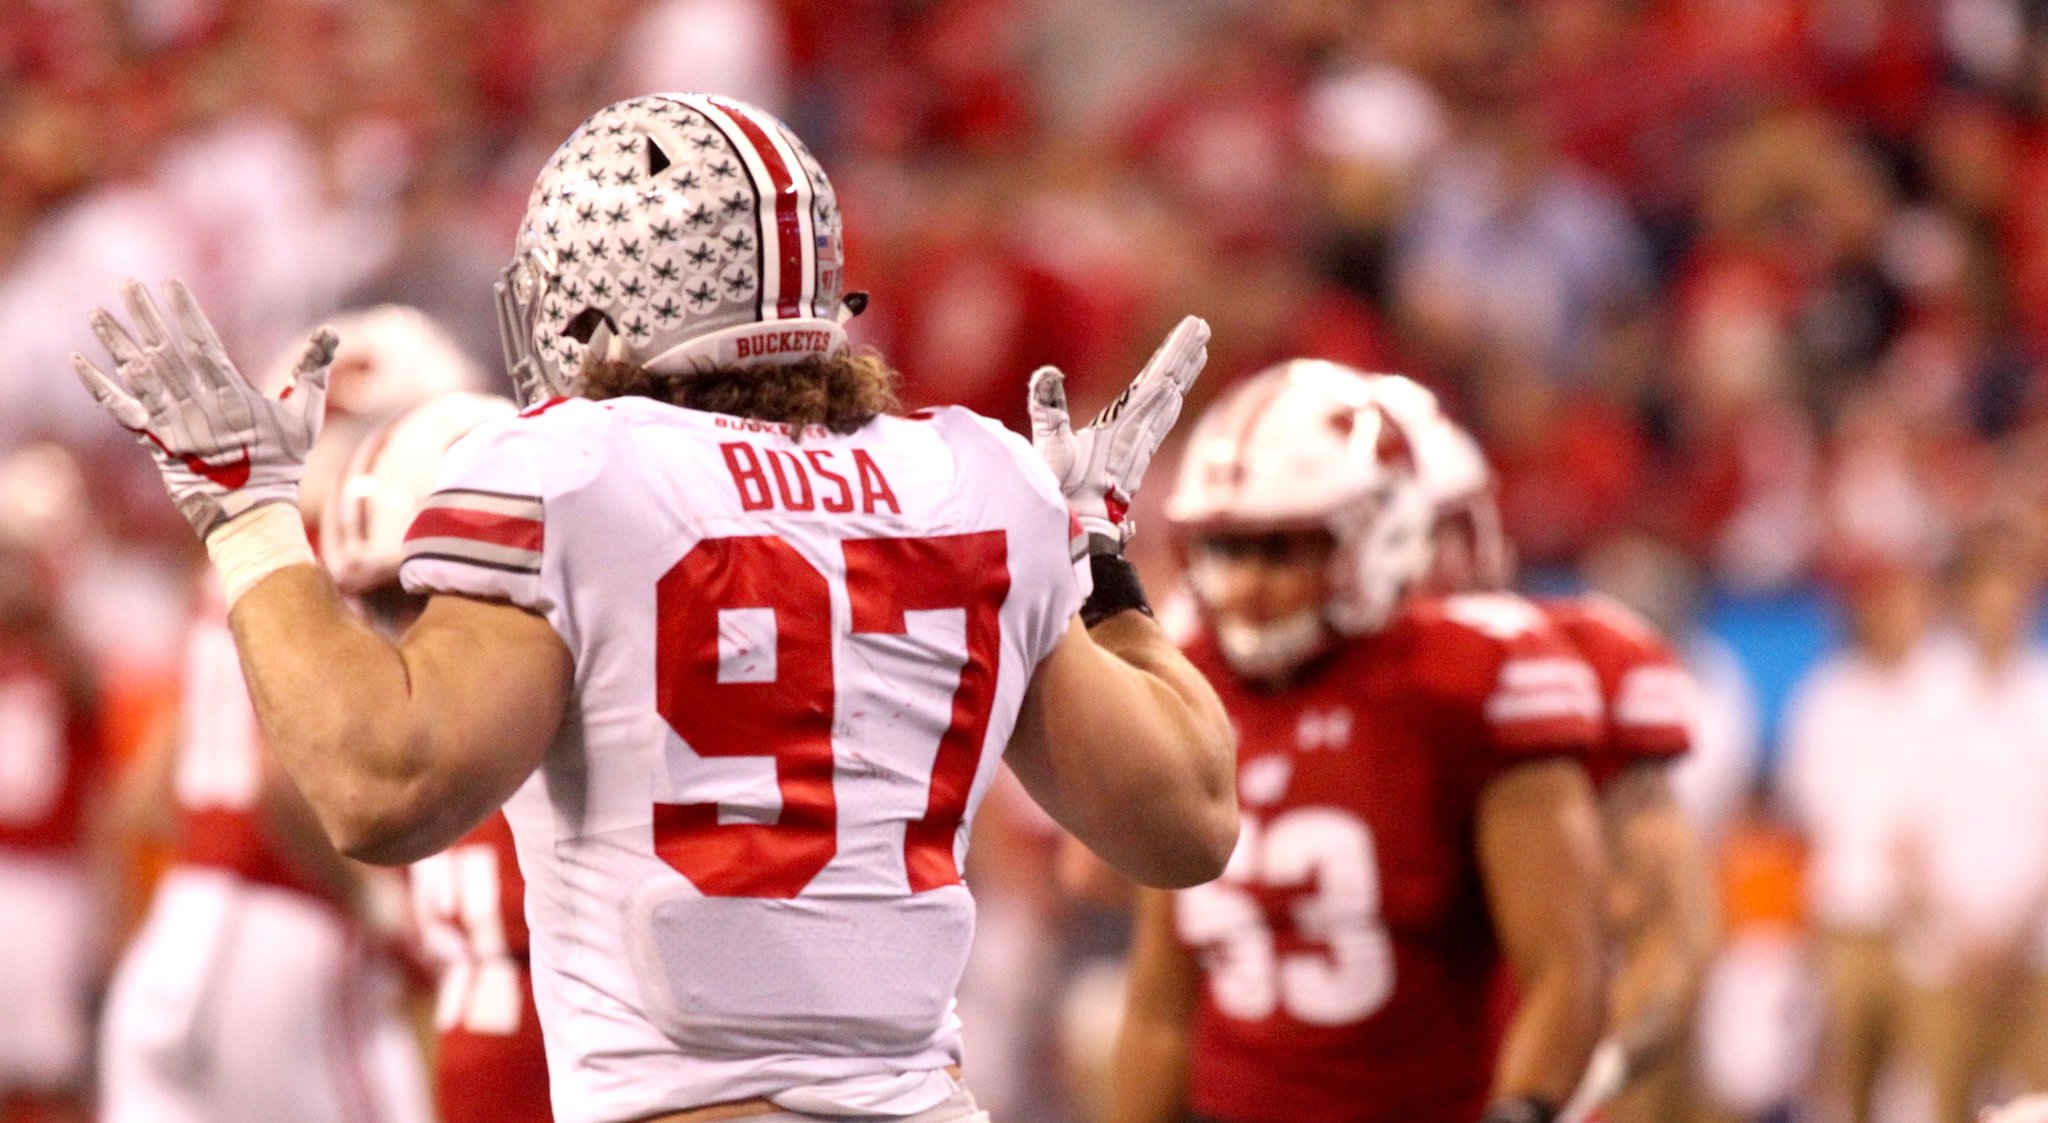 Joey Bosa Making a Big Impact for the Chargers - Best NFL Polls